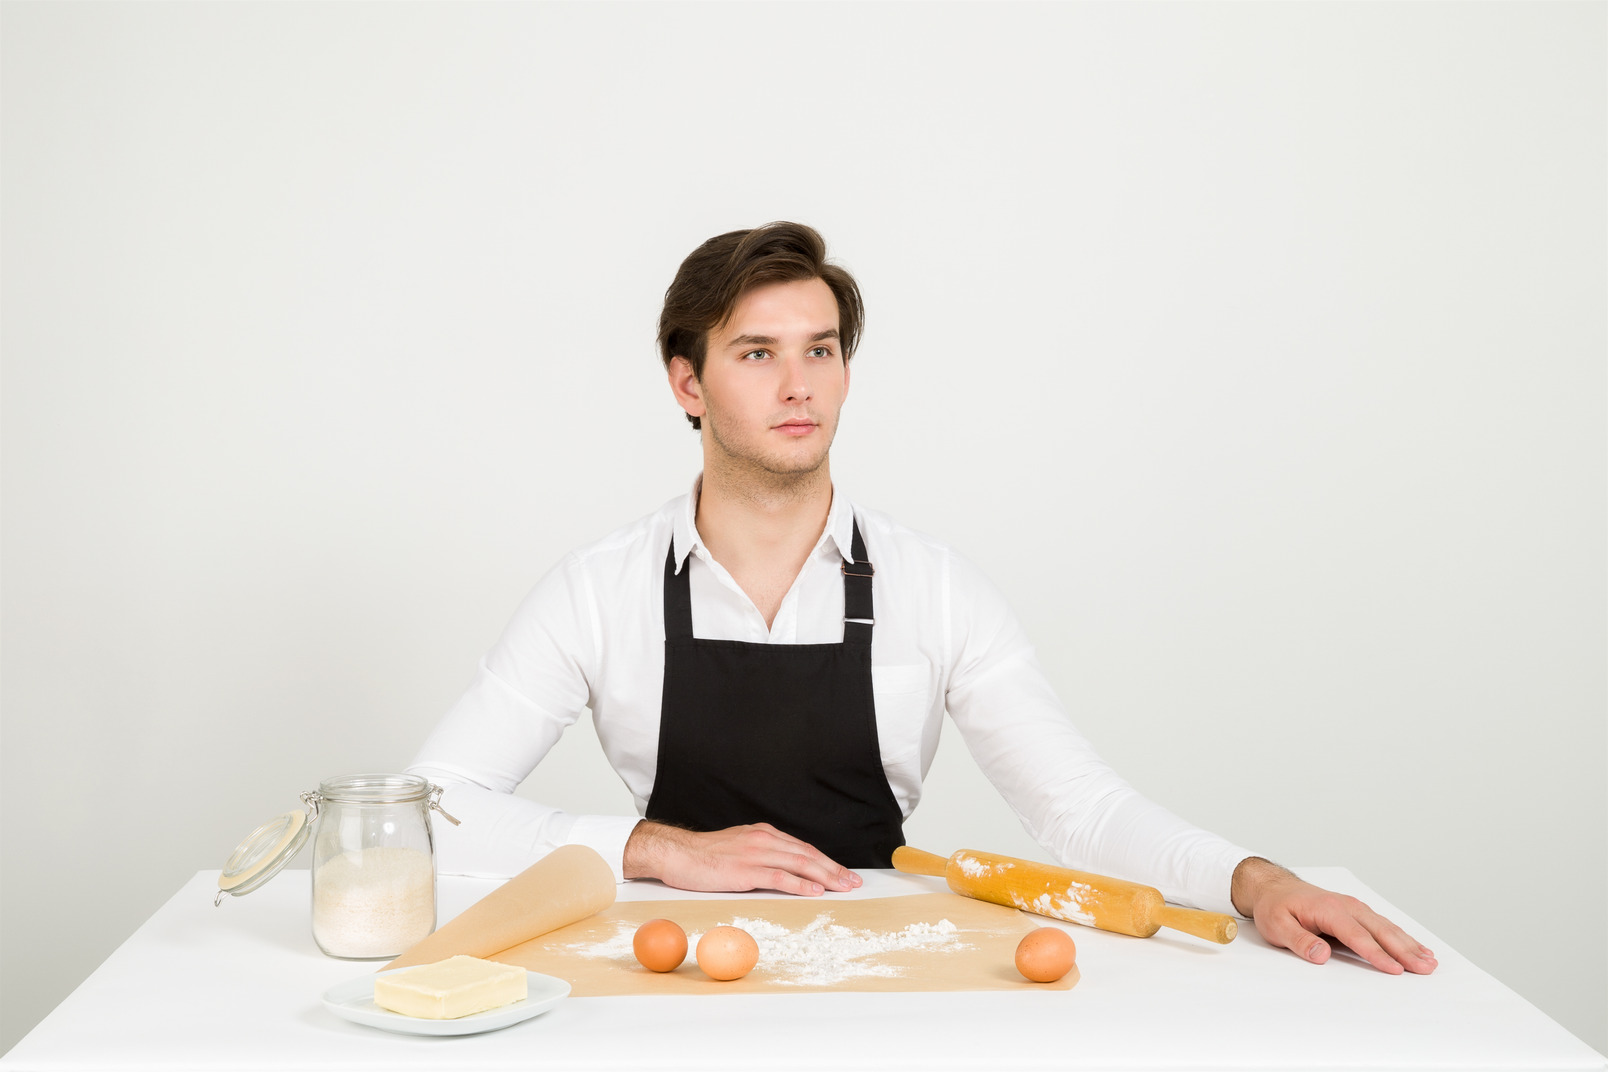 Male chef sitting at the table with ingredients and cooking tools on it